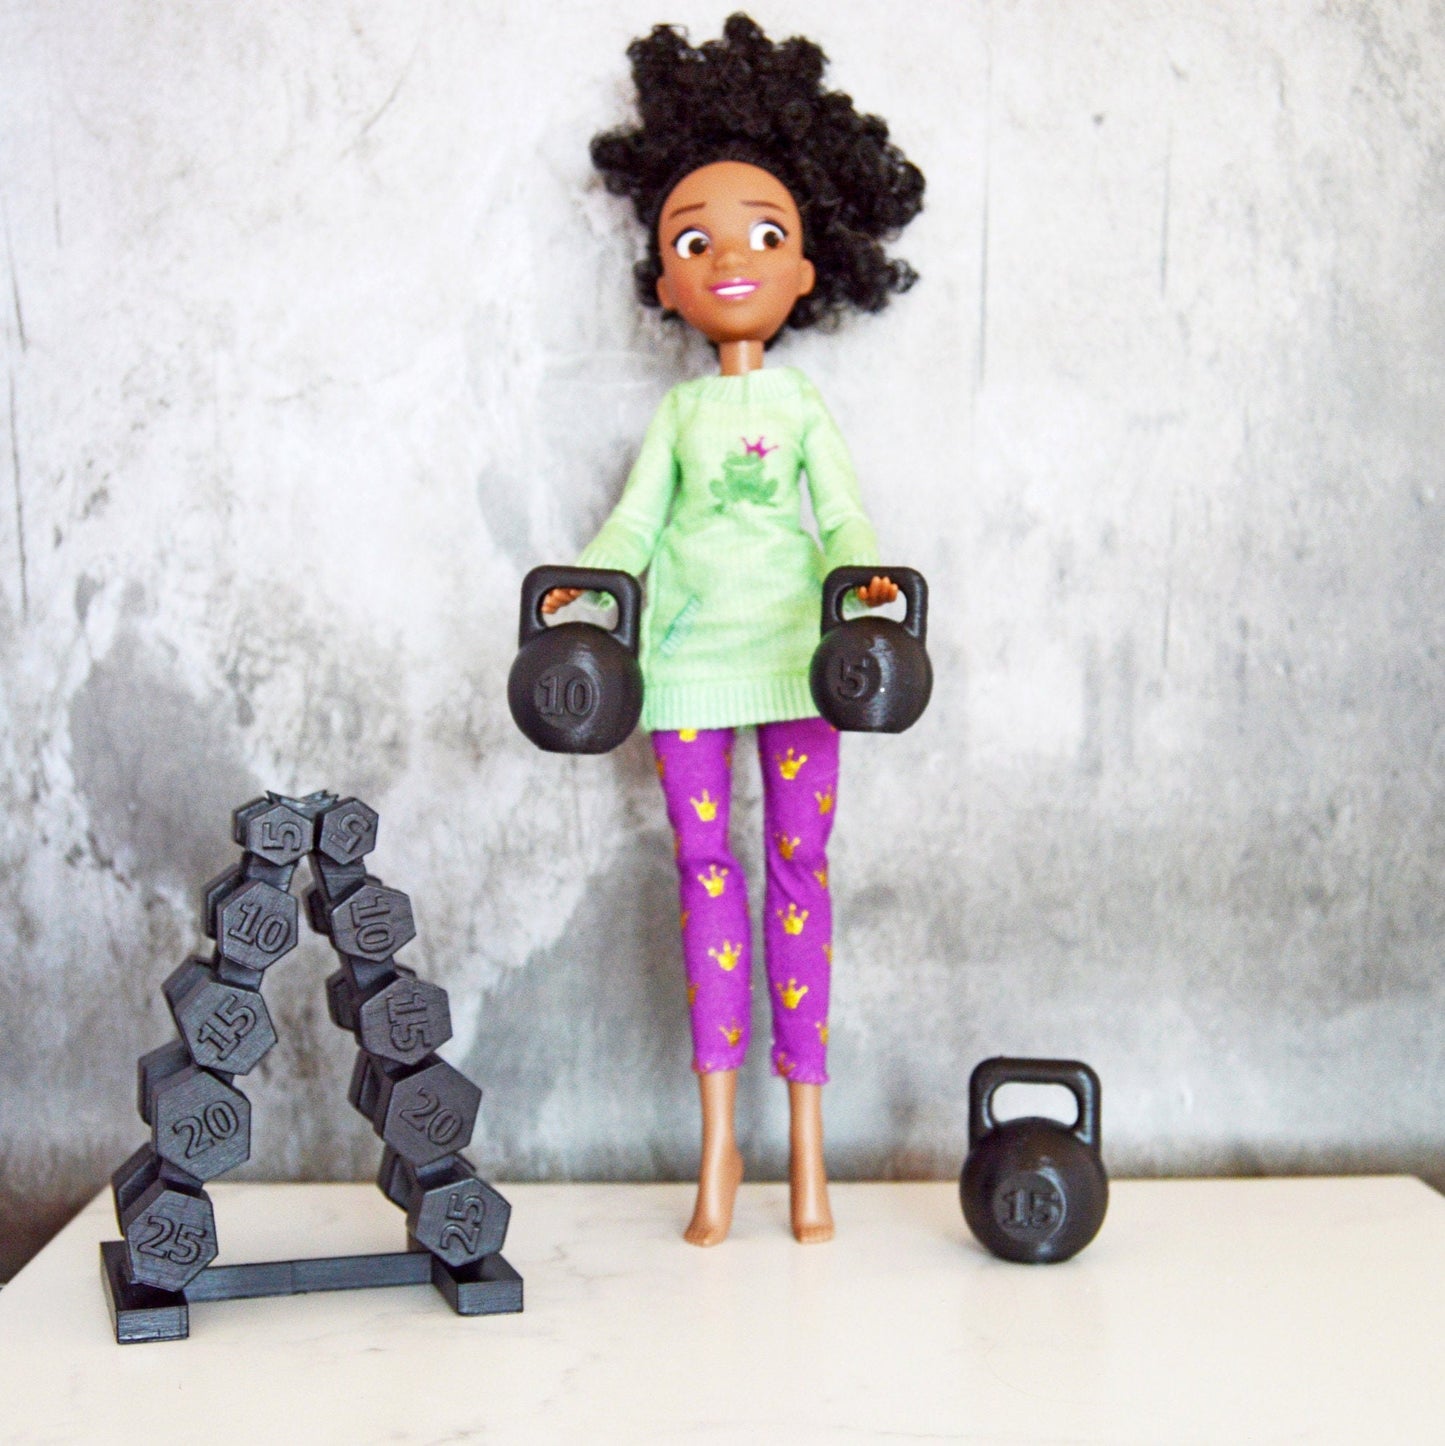 1 6 Scale Free Weight Dumbbells, 1 6 Scale Diorama, 1 6 Scale Doll furniture, Hand Weights Stand, Mini Weights, 3D Printed Gym, Body Builder